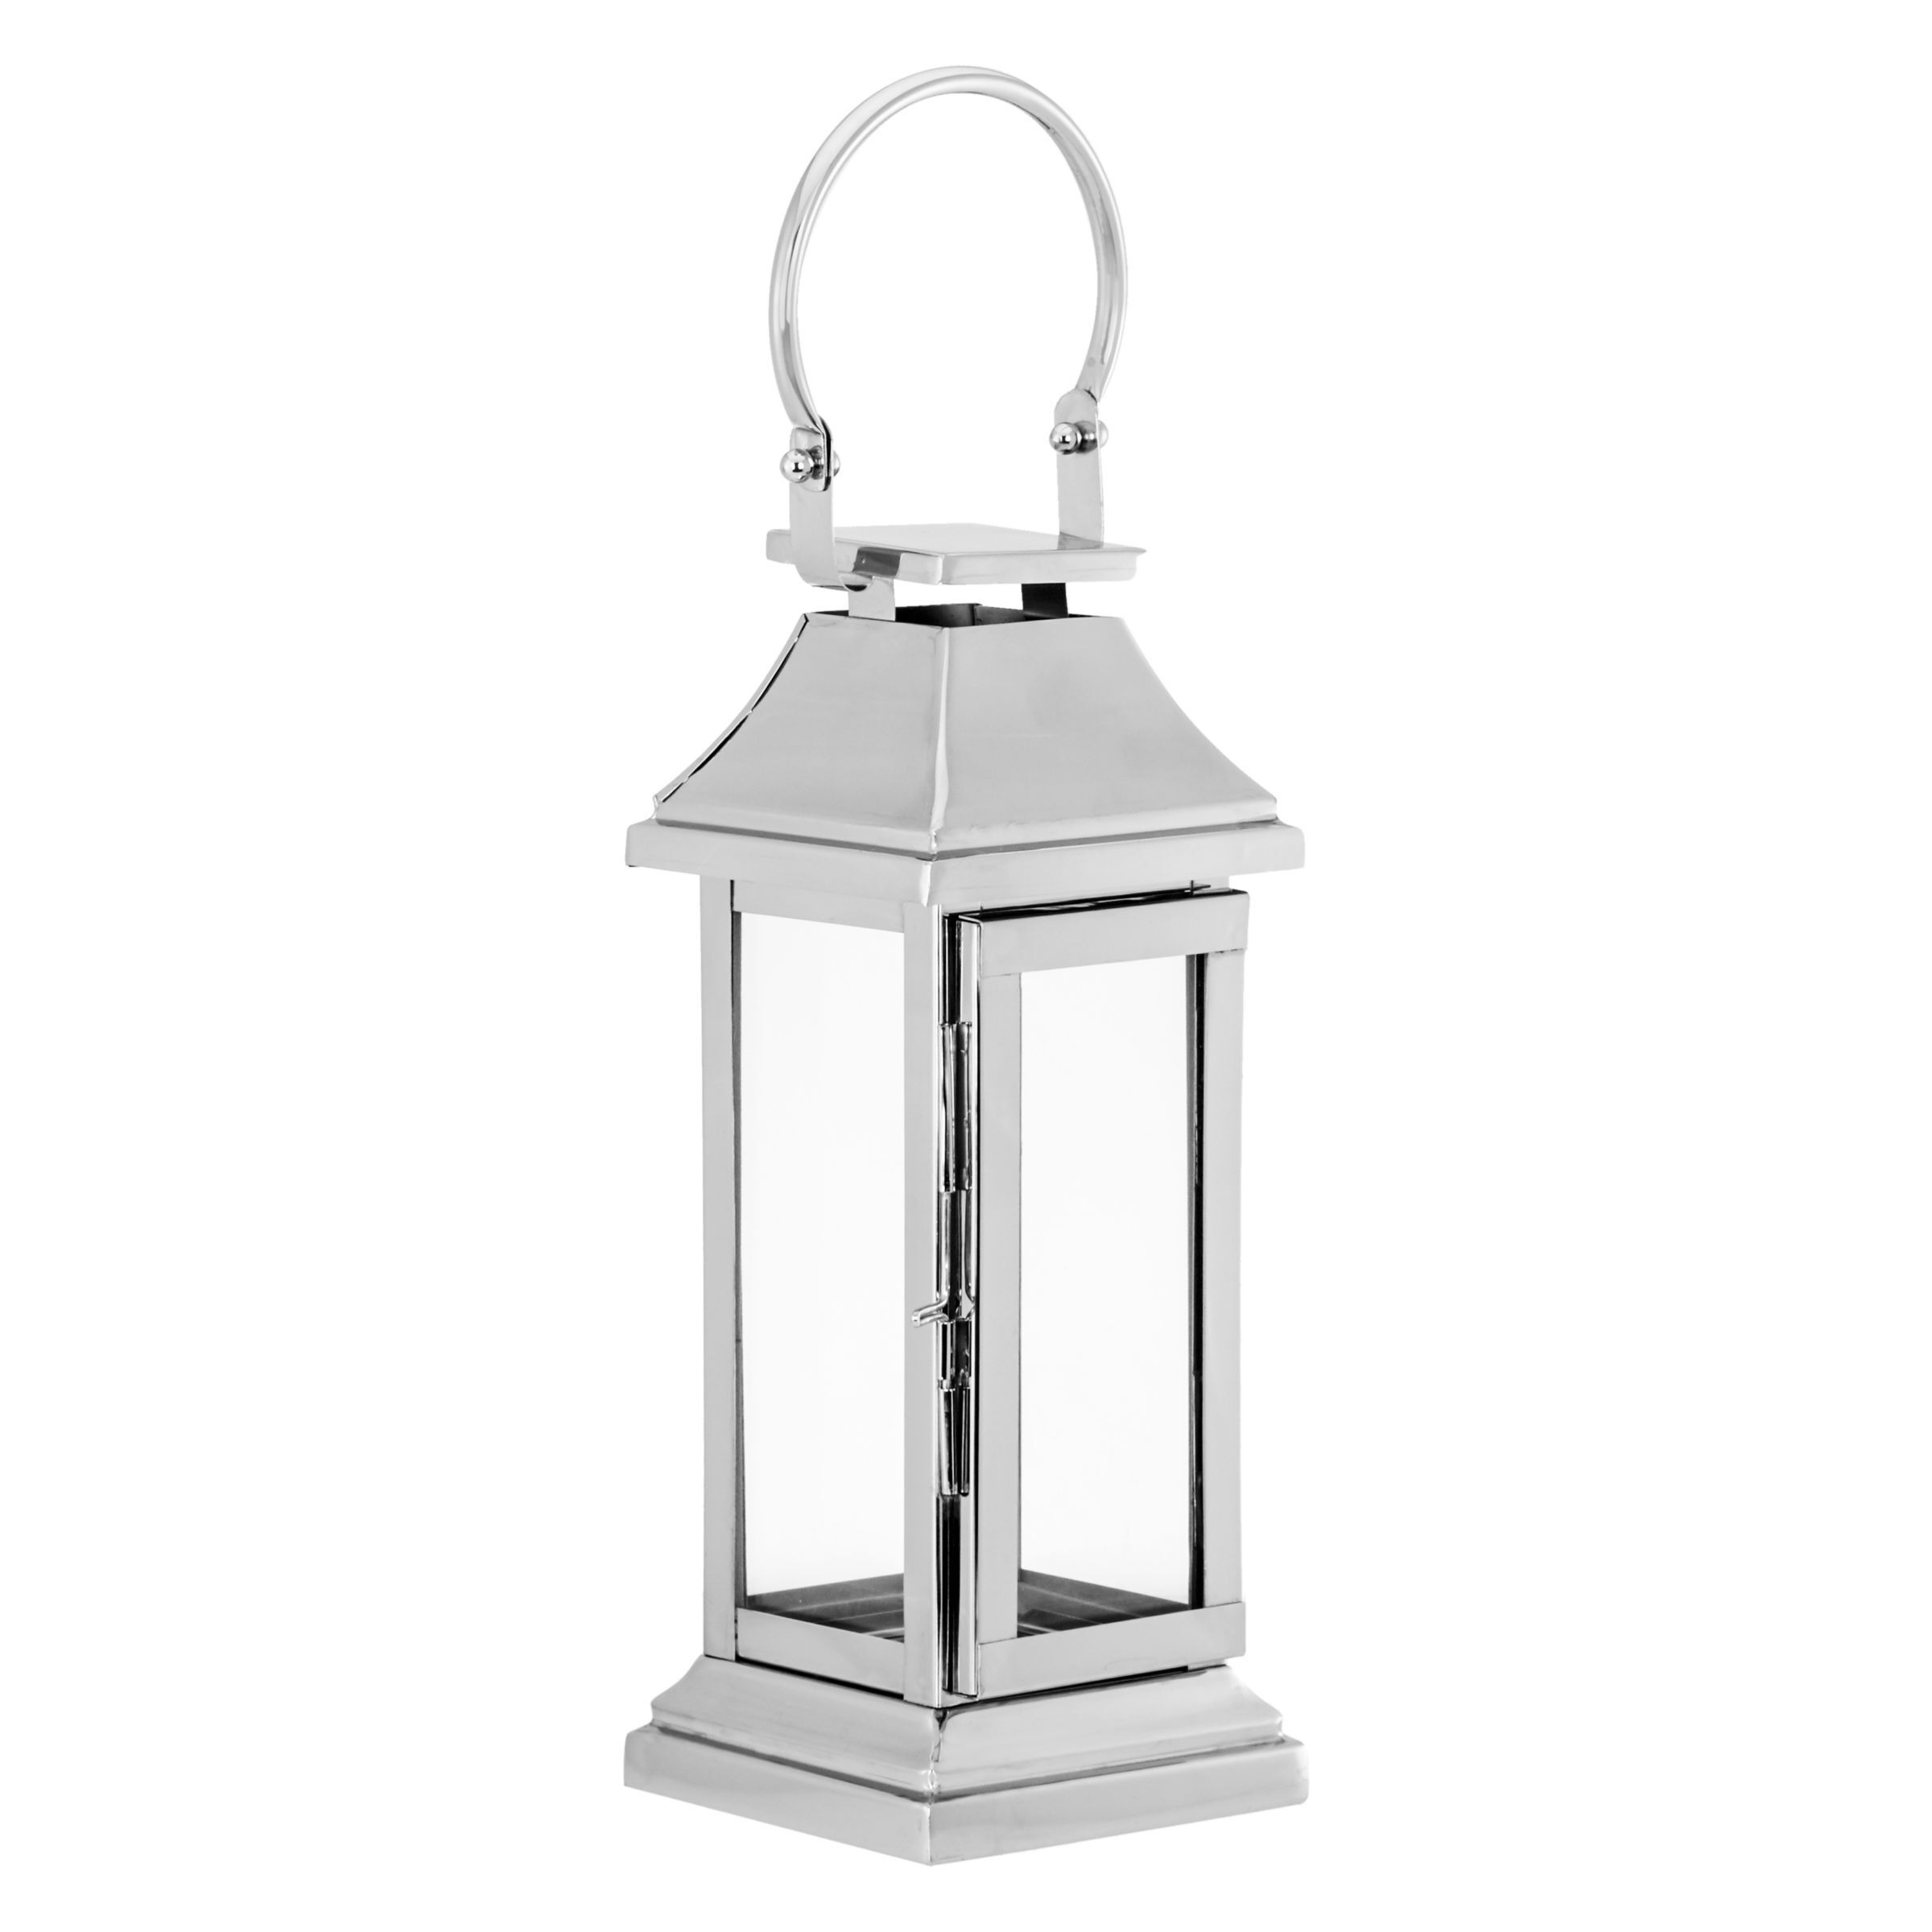 Culinary Concepts Station Lantern - image 1